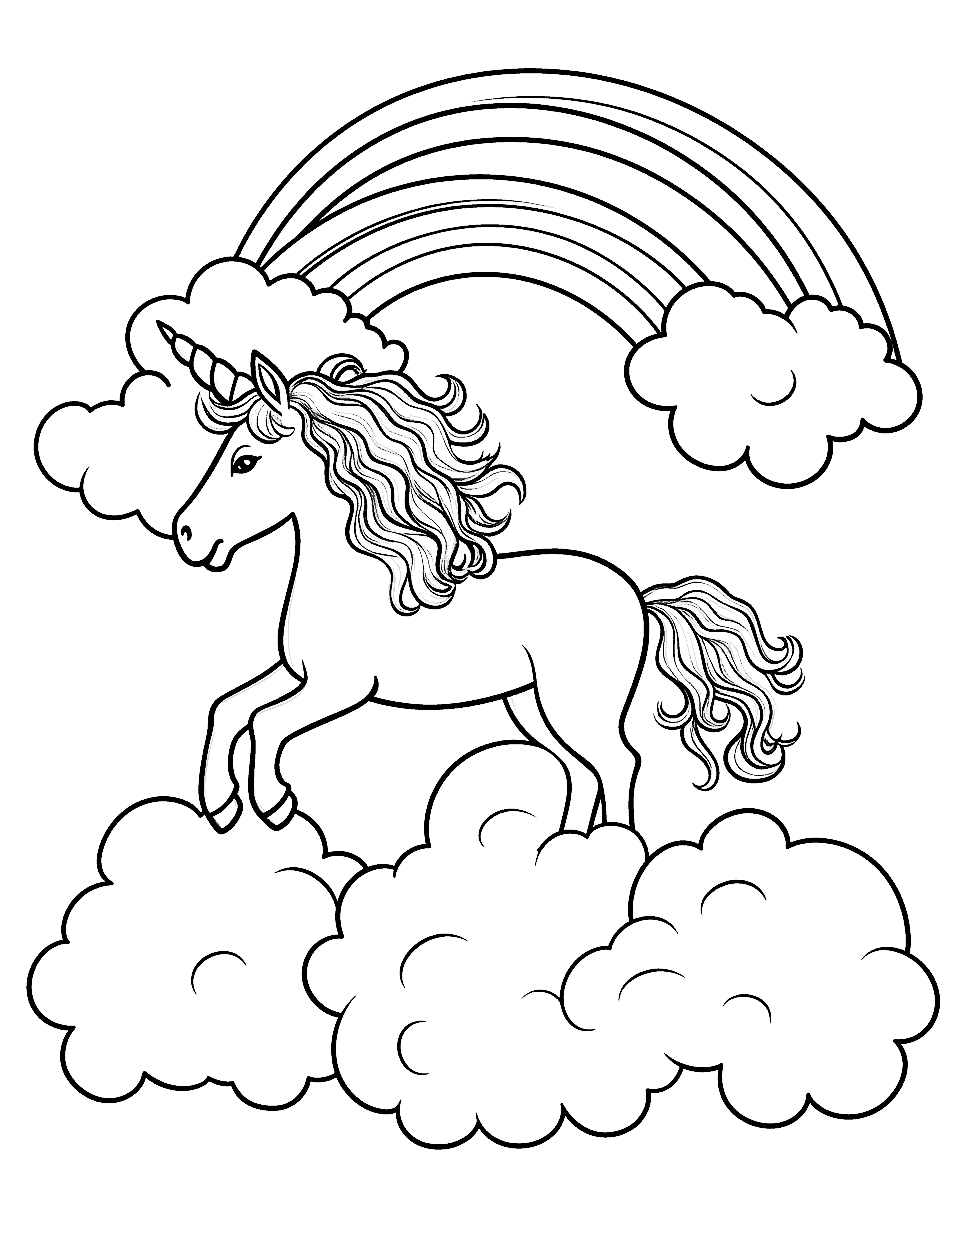 Unicorn and a Rainbow Coloring Page - A unicorn sliding down a rainbow, with clouds and sky in the background.